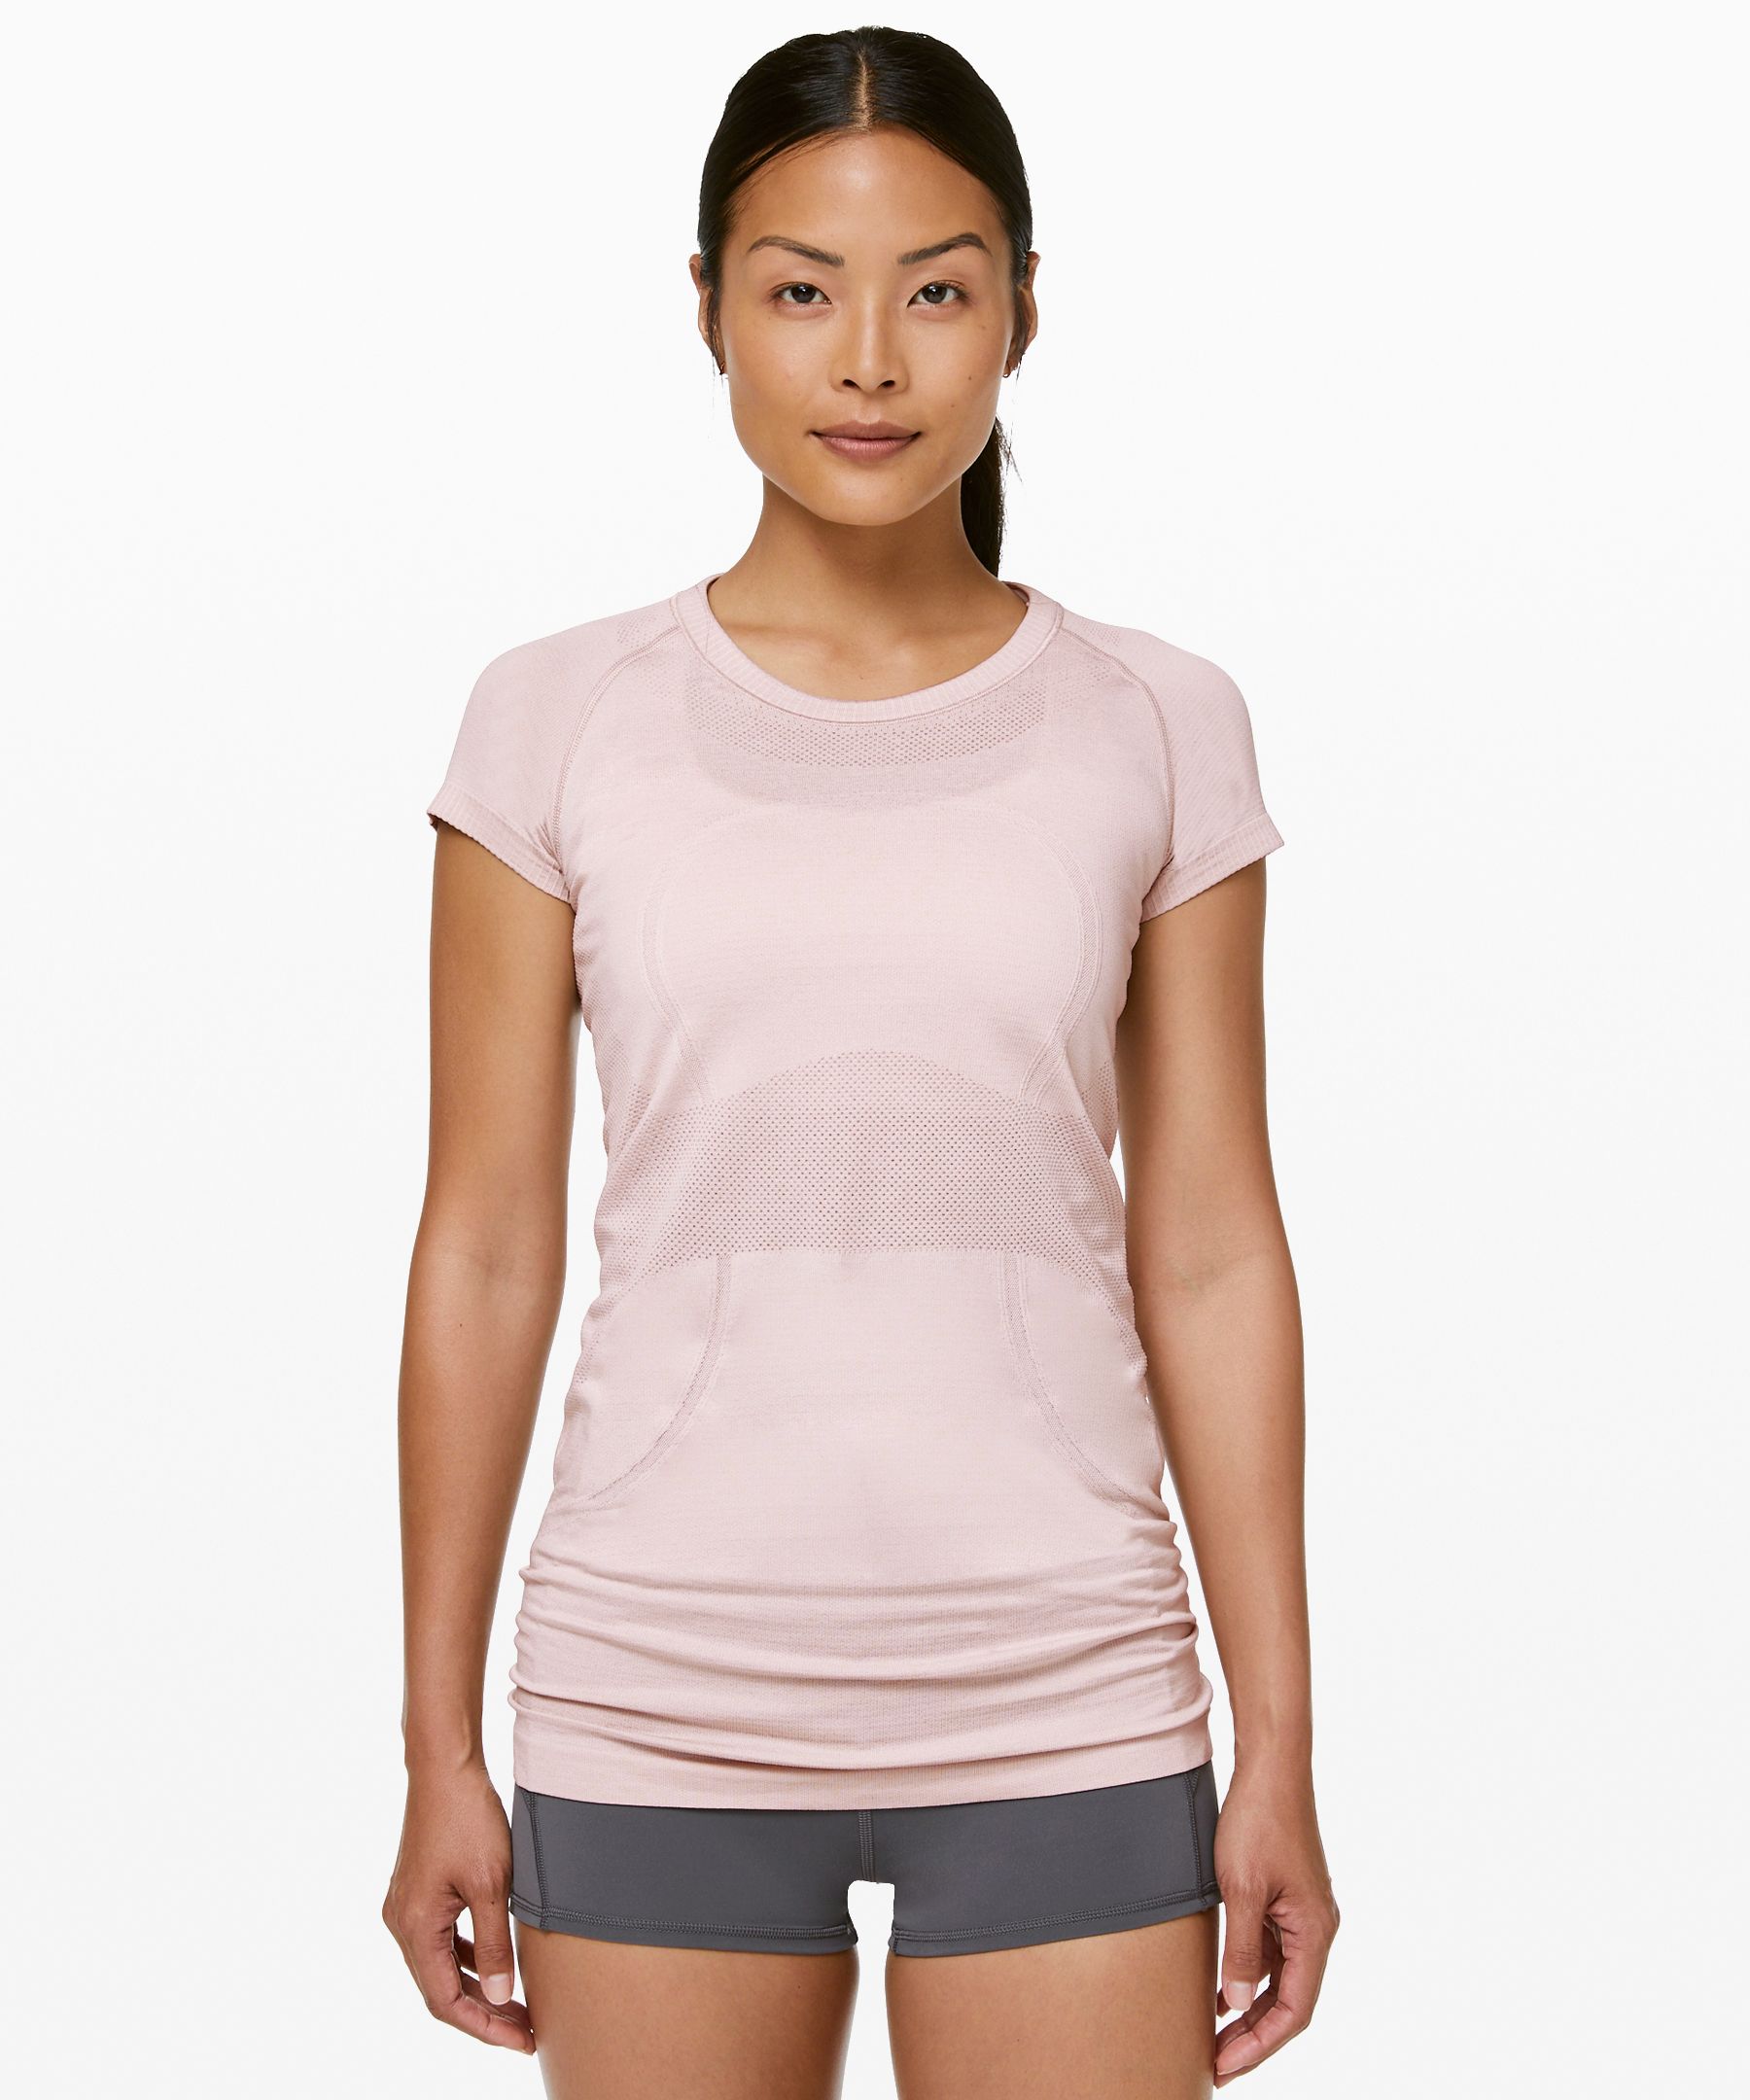 Lululemon Swiftly Tech Short Sleeve Crew In Pink Bliss/pink Bliss